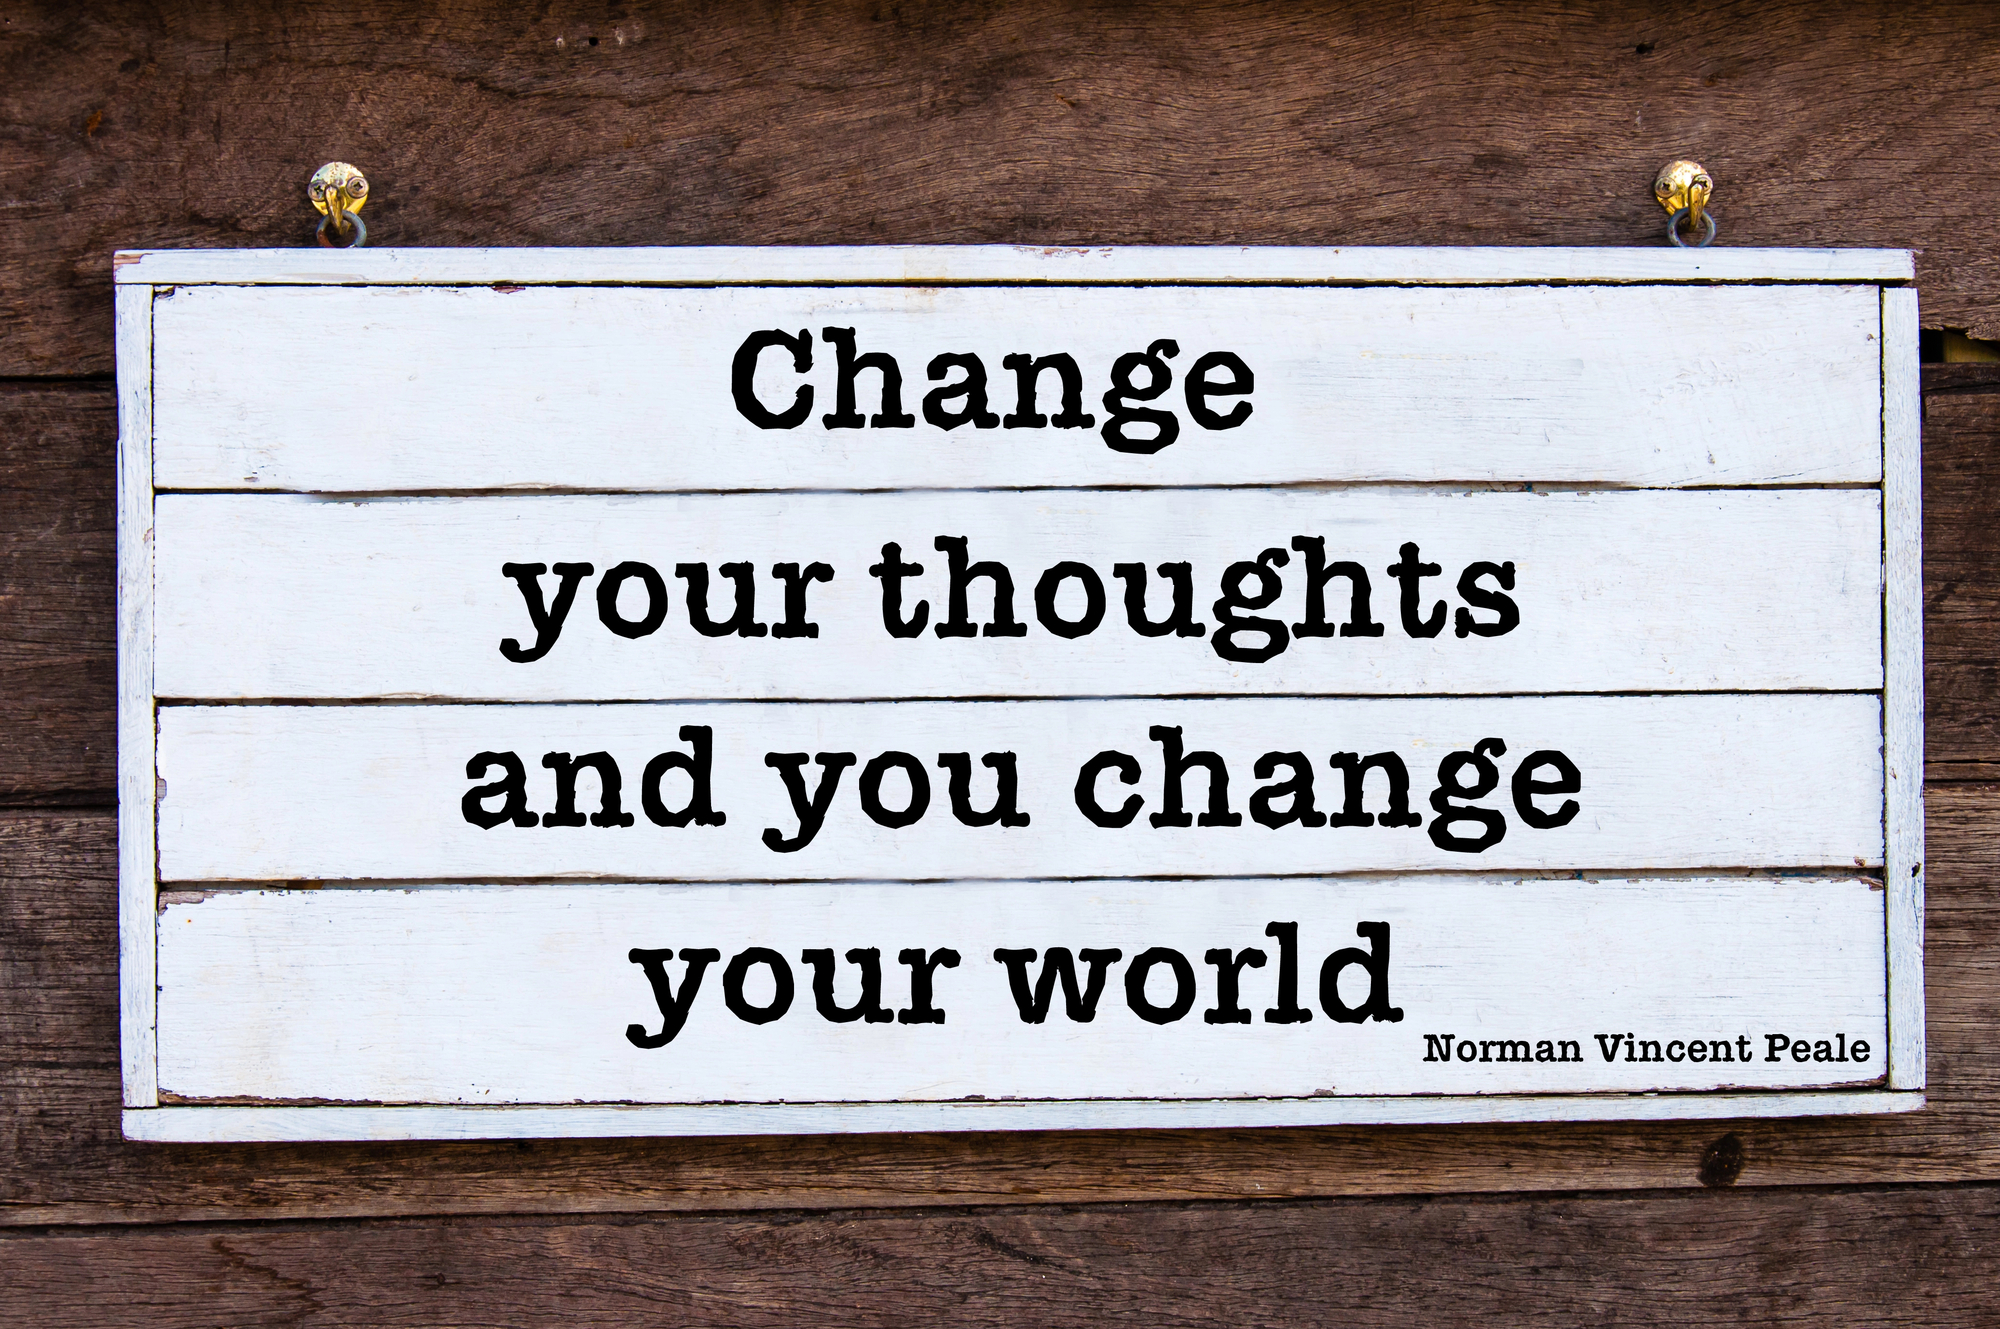 Quote: "Change your thoughts and you change your world." Norman Vincent Peale